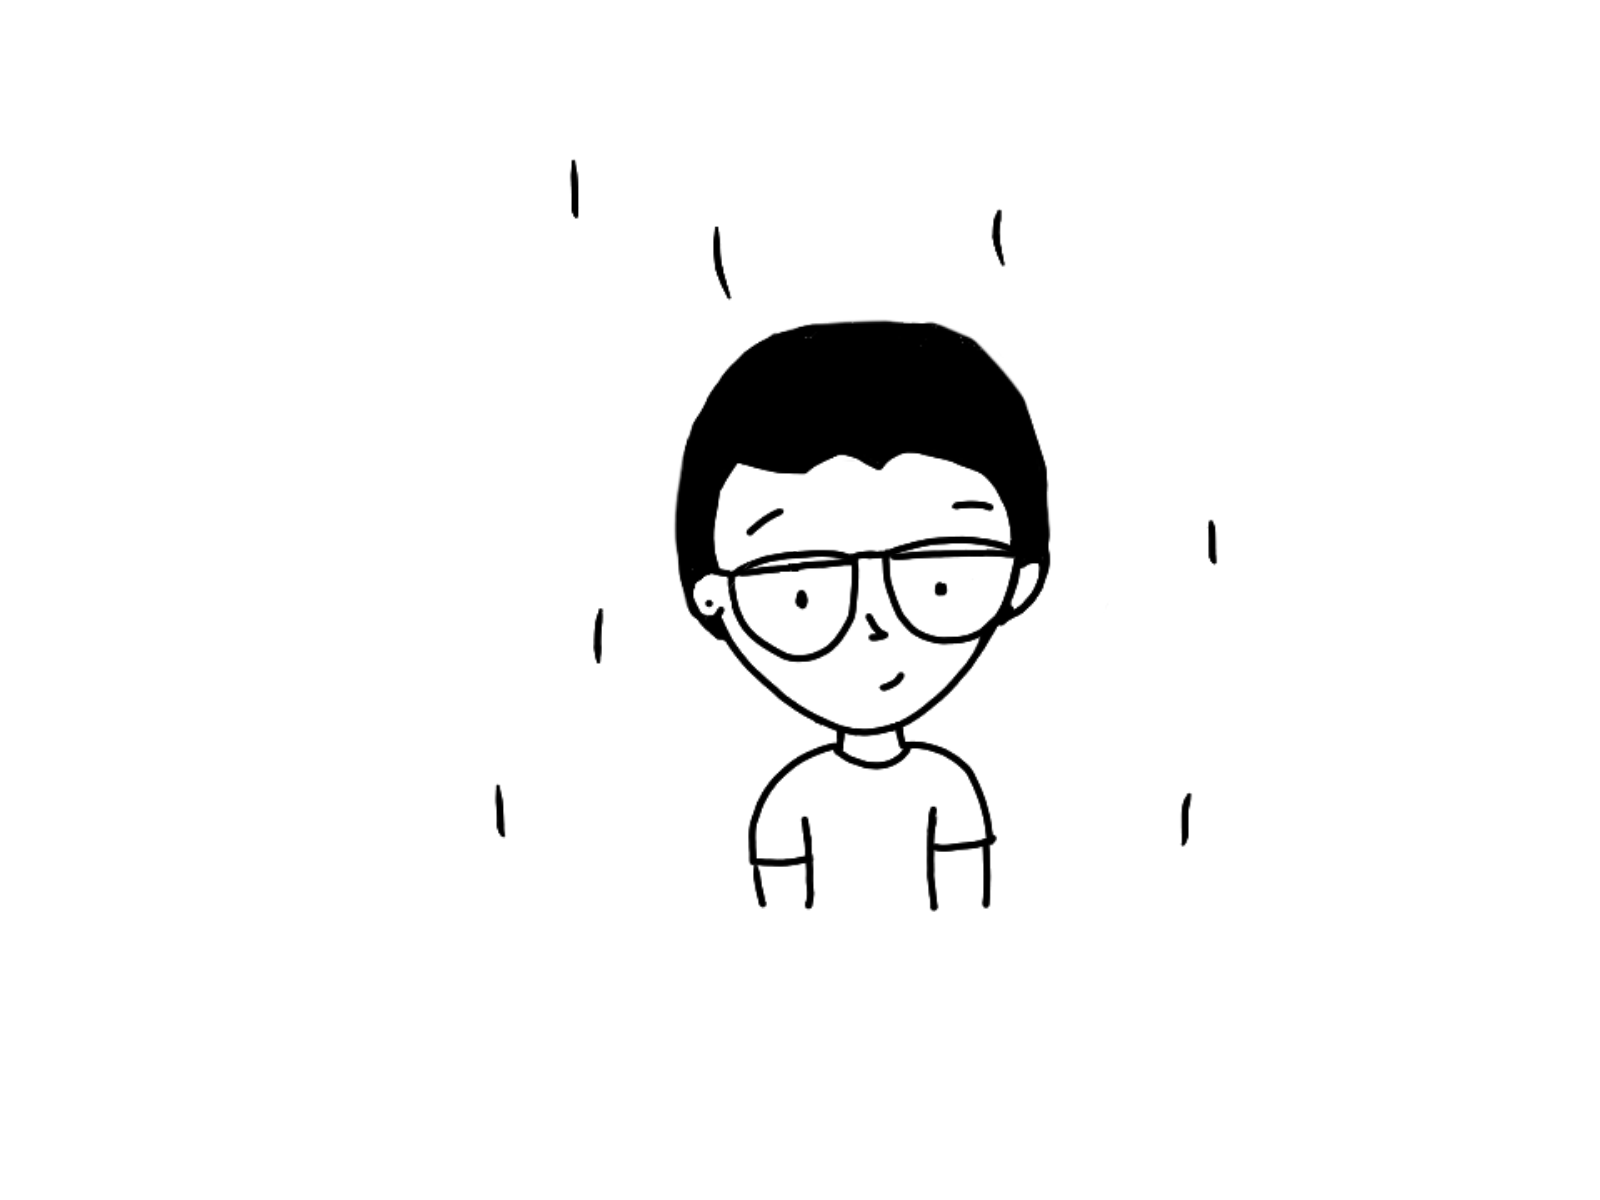 Windshield wipers glasses animation flipaclip frame by frame glasses hand drawn illustration